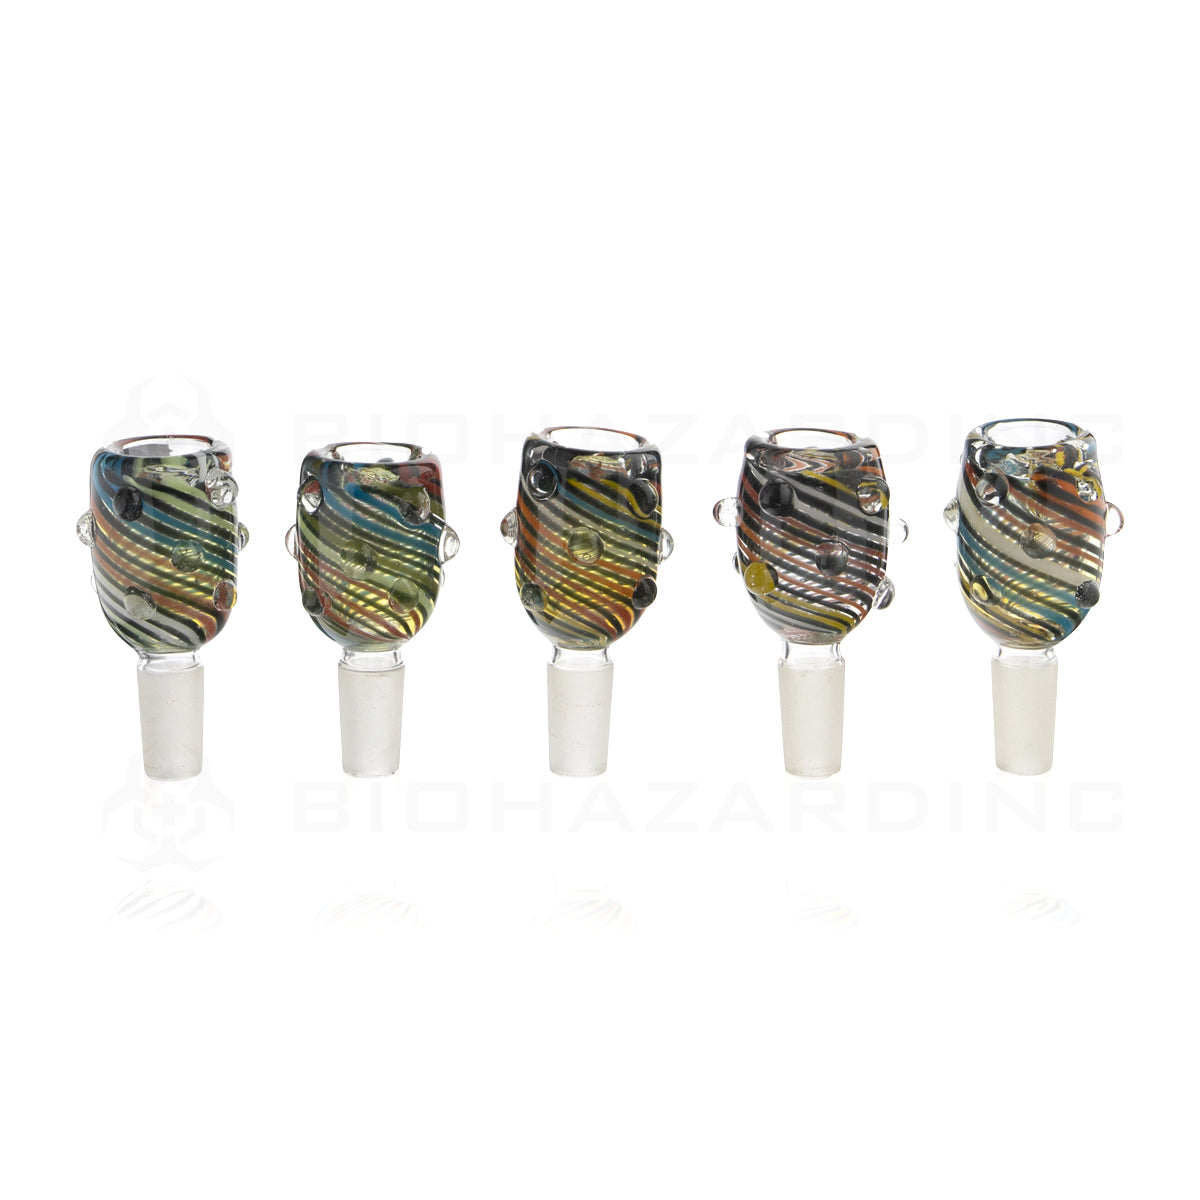 Bowl | Swirl Marbles Tall Glass Bowls | 14mm - Assorted Colors - 5 Count Glass Bowl Biohazard Inc   